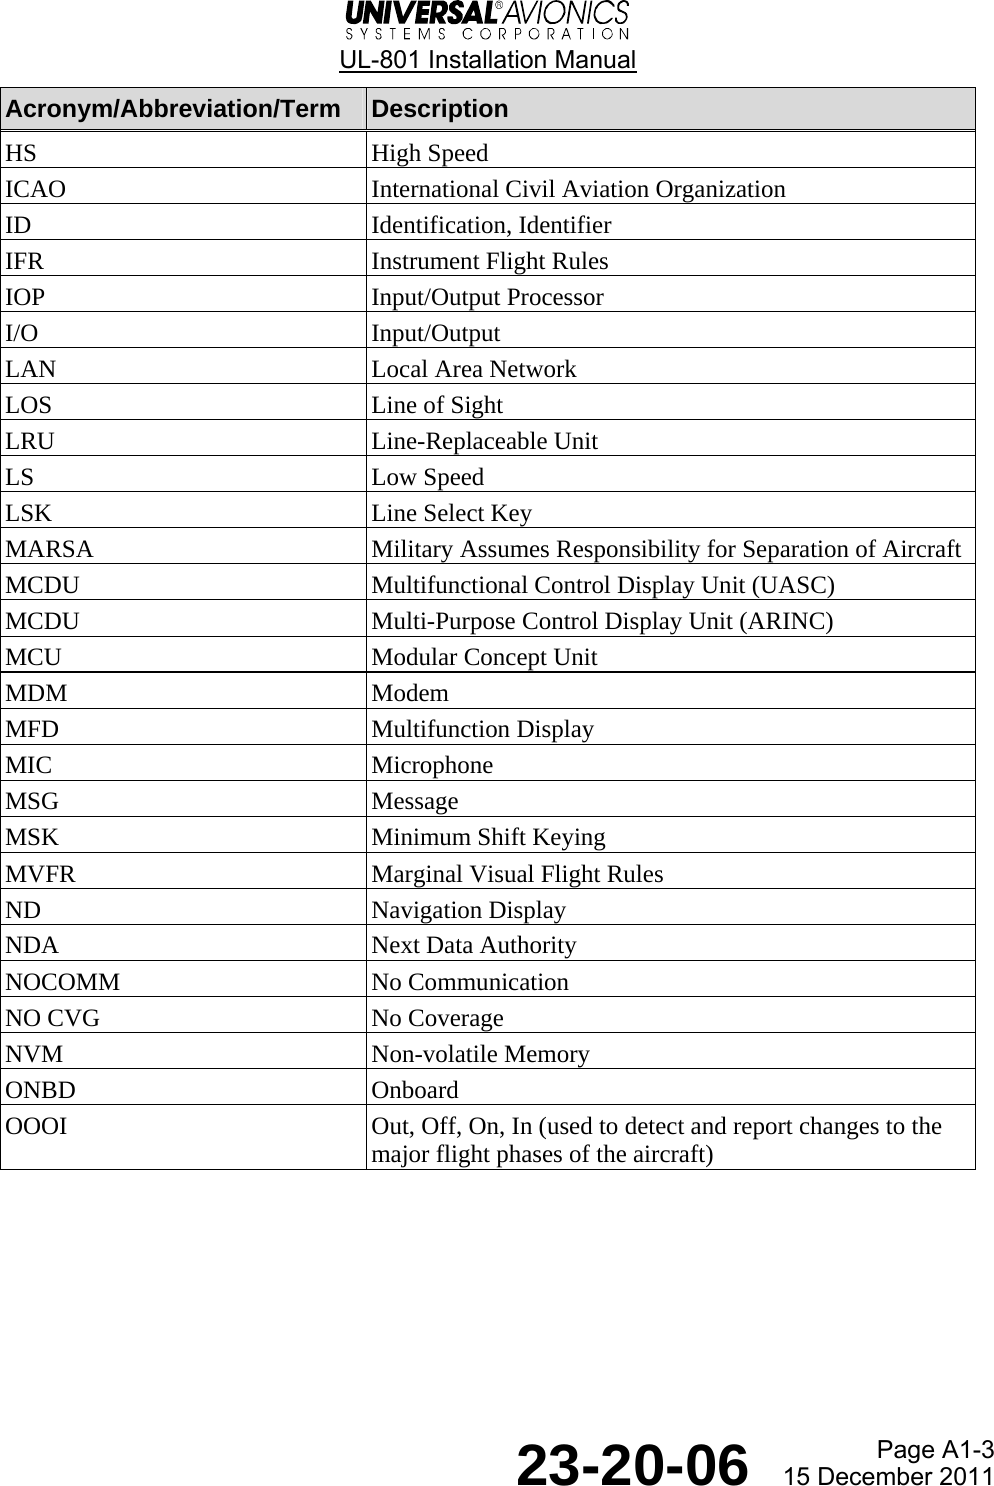  UL-801 Installation Manual  Page A1-3  23-20-06  15 December 2011 Acronym/Abbreviation/Term  Description HS High Speed ICAO  International Civil Aviation Organization ID Identification, Identifier IFR Instrument Flight Rules IOP Input/Output Processor I/O Input/Output LAN Local Area Network LOS  Line of Sight LRU Line-Replaceable Unit LS Low Speed LSK Line Select Key MARSA  Military Assumes Responsibility for Separation of Aircraft MCDU  Multifunctional Control Display Unit (UASC) MCDU  Multi-Purpose Control Display Unit (ARINC) MCU  Modular Concept Unit MDM Modem MFD Multifunction Display MIC Microphone MSG Message MSK  Minimum Shift Keying MVFR  Marginal Visual Flight Rules ND Navigation Display NDA  Next Data Authority NOCOMM No Communication NO CVG  No Coverage NVM Non-volatile Memory ONBD Onboard OOOI  Out, Off, On, In (used to detect and report changes to the major flight phases of the aircraft) 